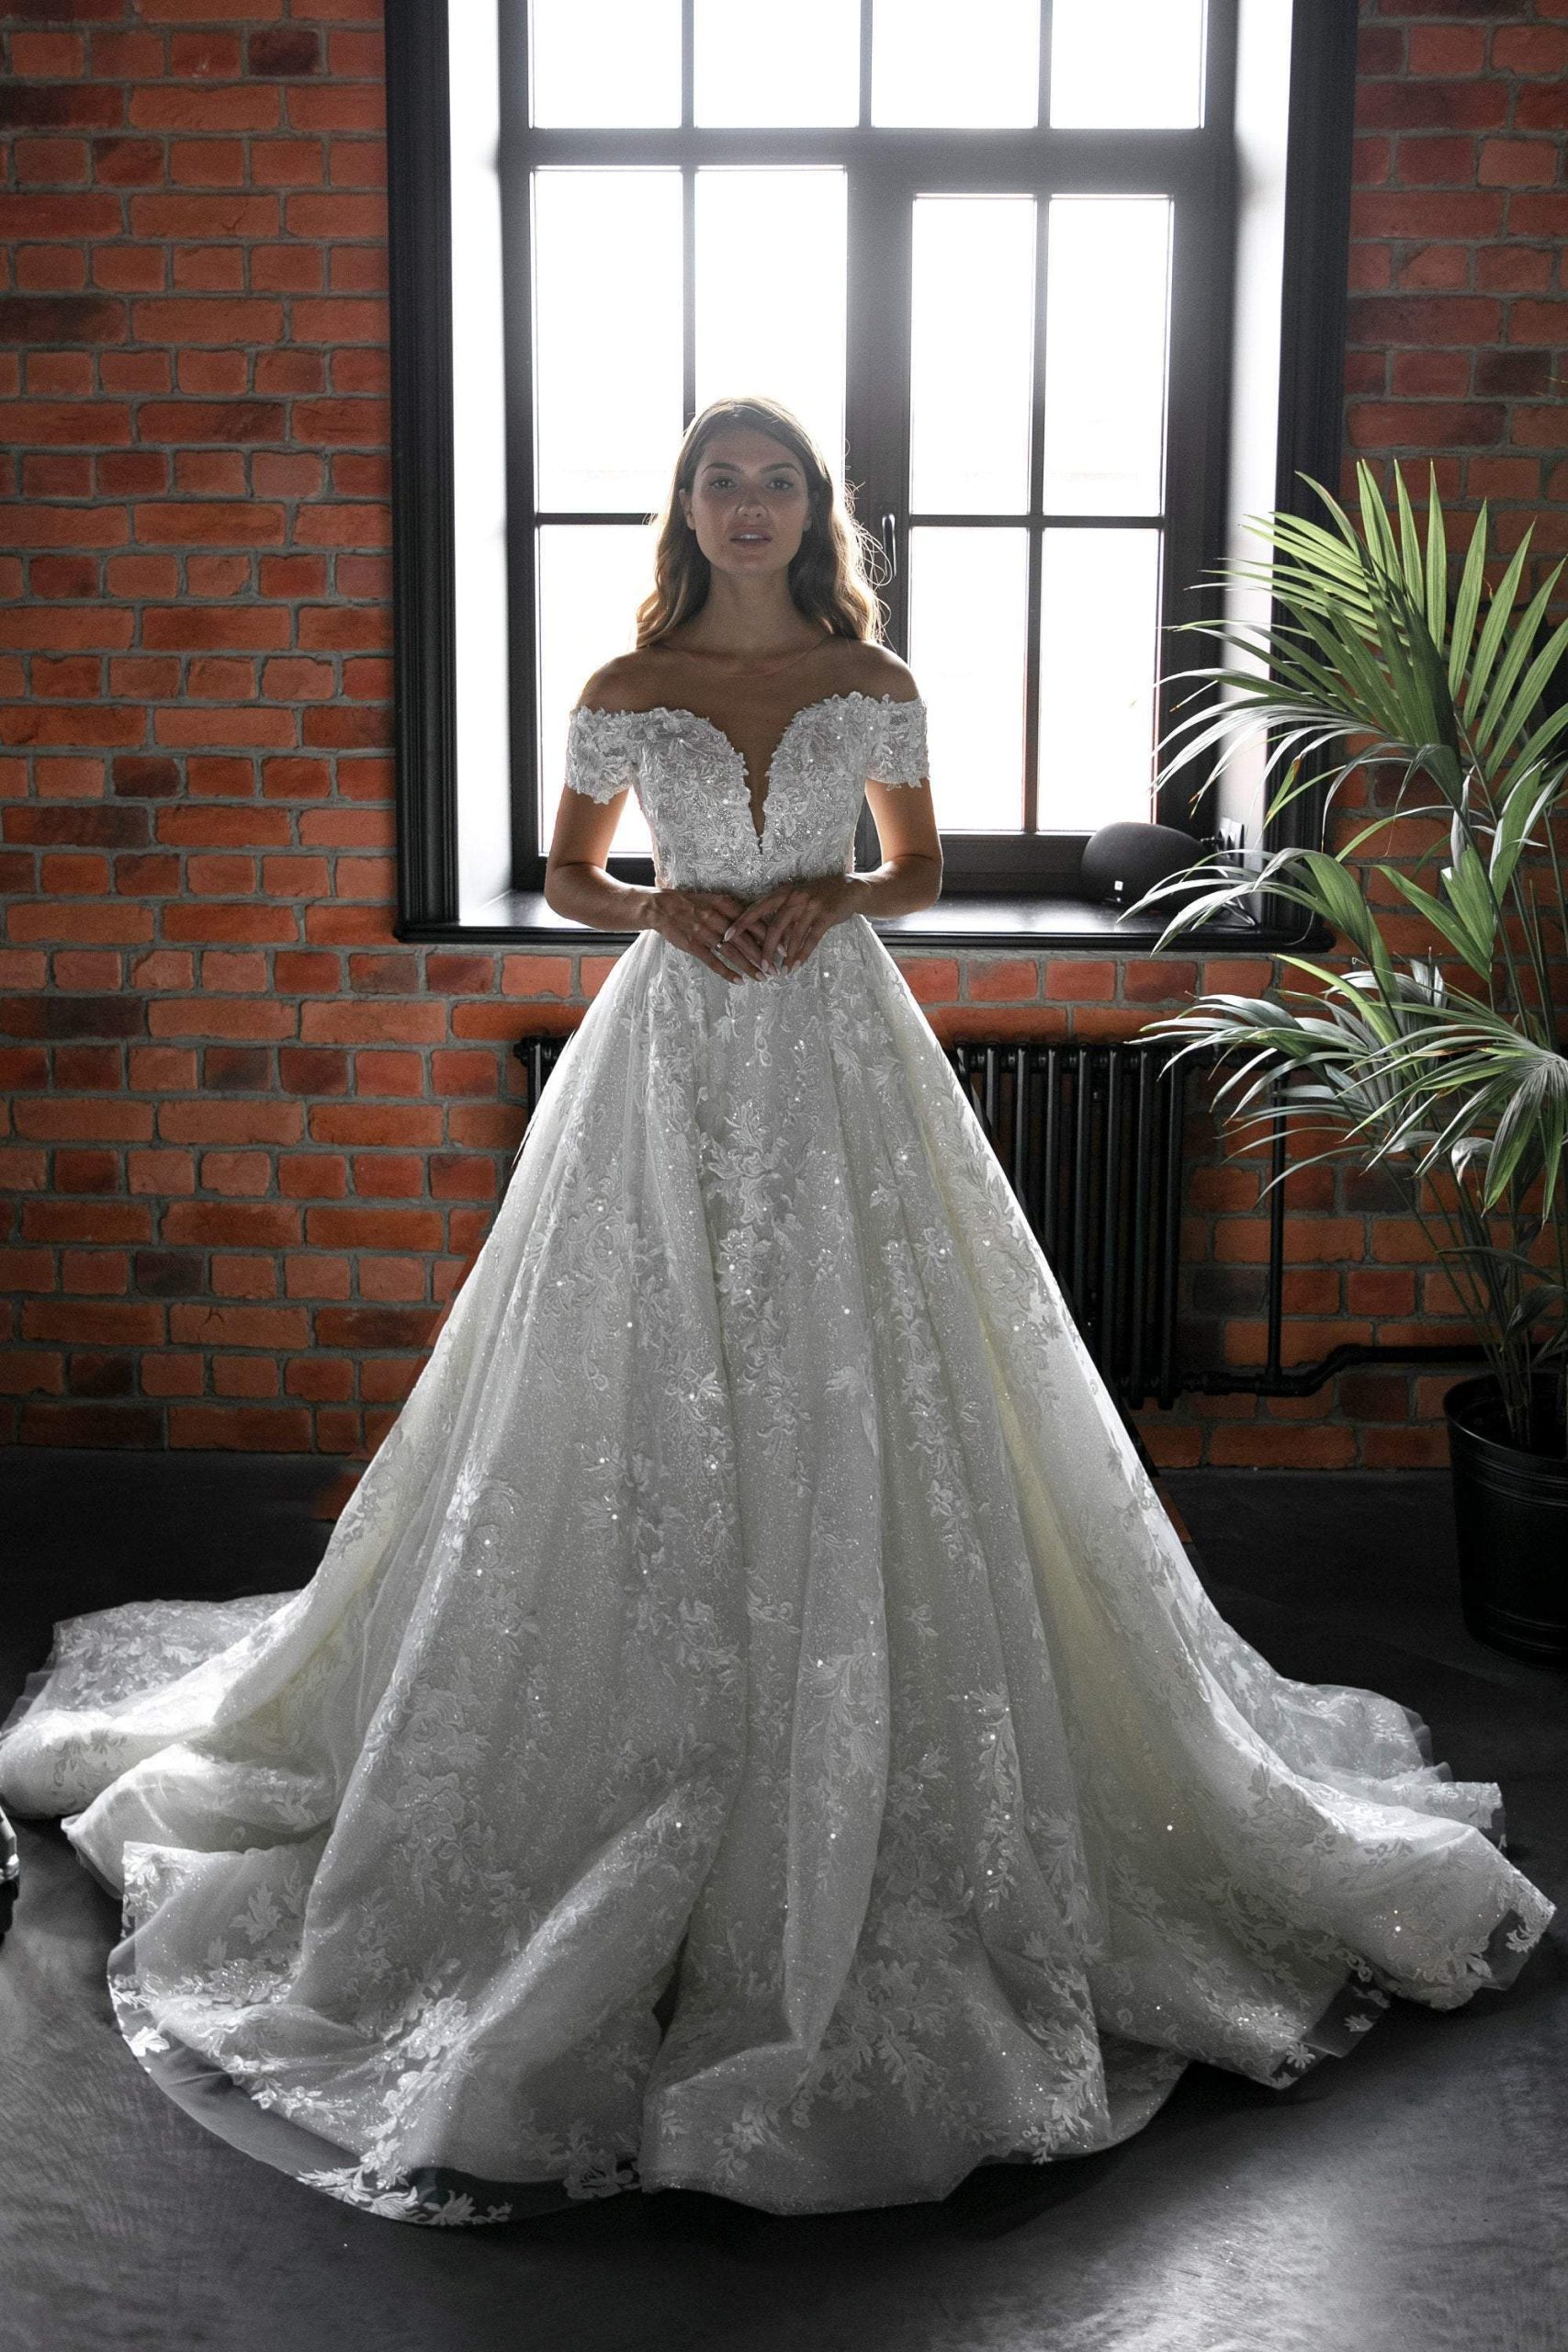 Lace Off-the-Shoulders Wedding Dress Charlotte